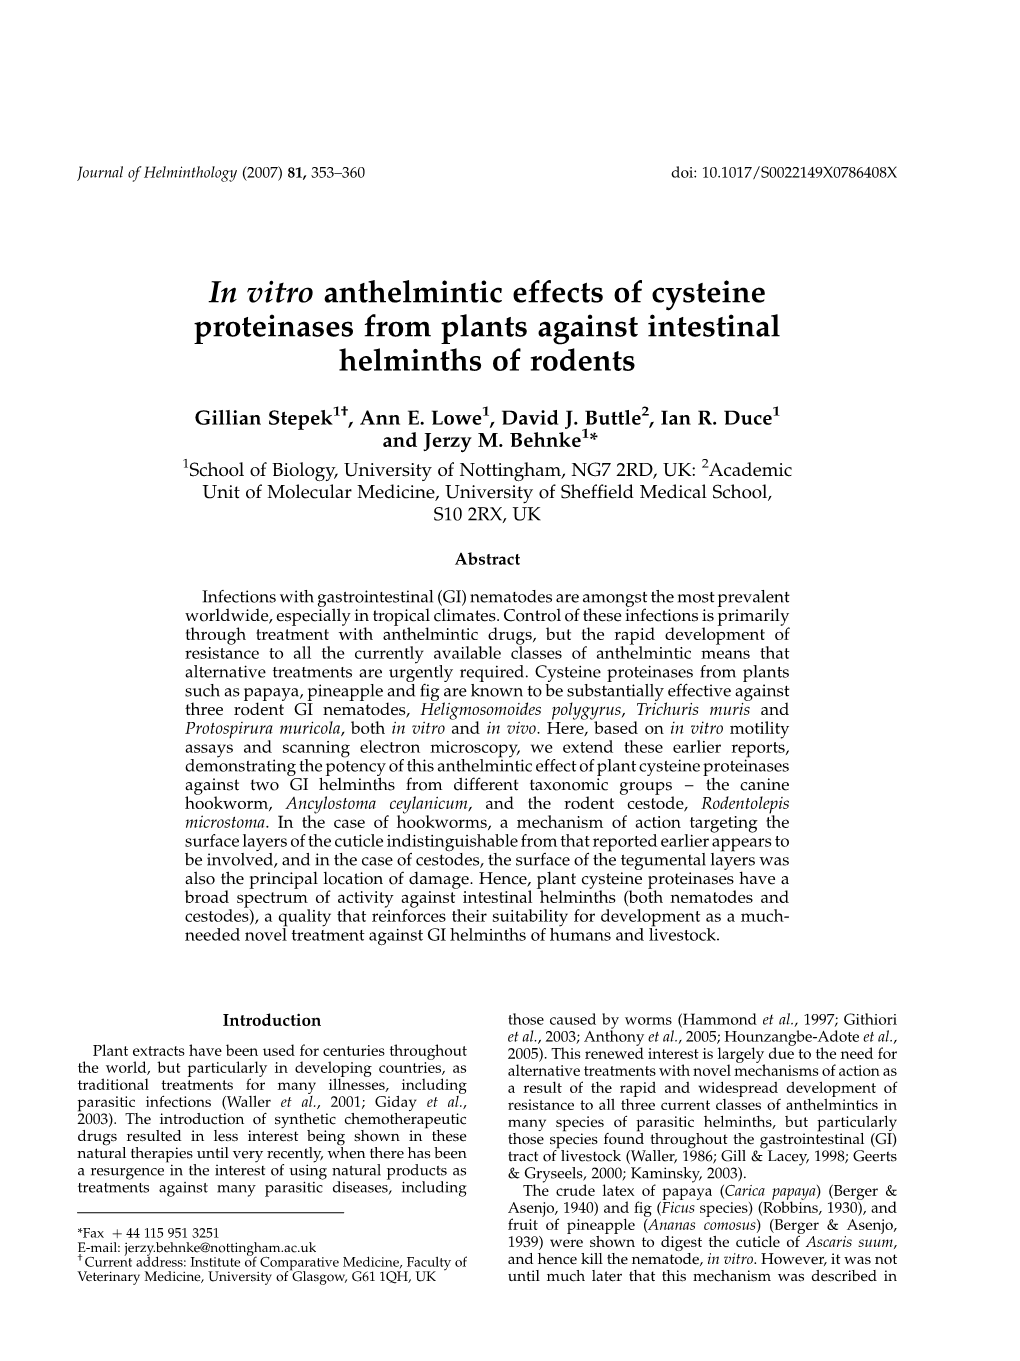 In Vitro Anthelmintic Effects of Cysteine Proteinases from Plants Against Intestinal Helminths of Rodents